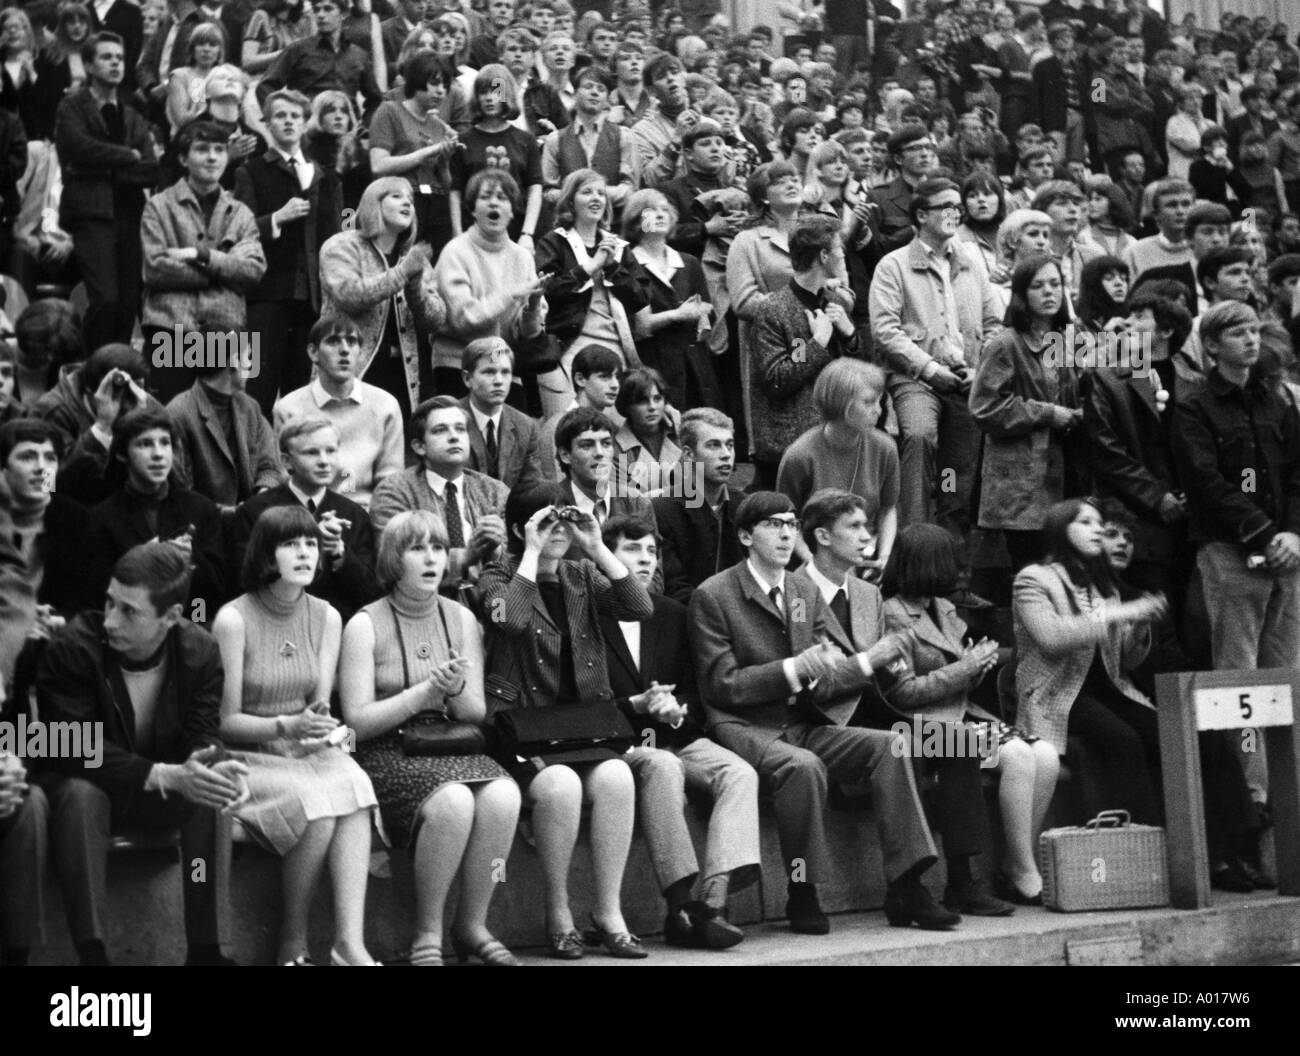 The Beatles, concert in Essen, Ruhr area, Gruga Hall, 1966, 1960s, the sixties, England, London, Great Britain, British pop band, music, musician, group, pop music, singers, youths in the Gruga Hall, crowd of spectators, young people, girls, boys, teens, Stock Photo